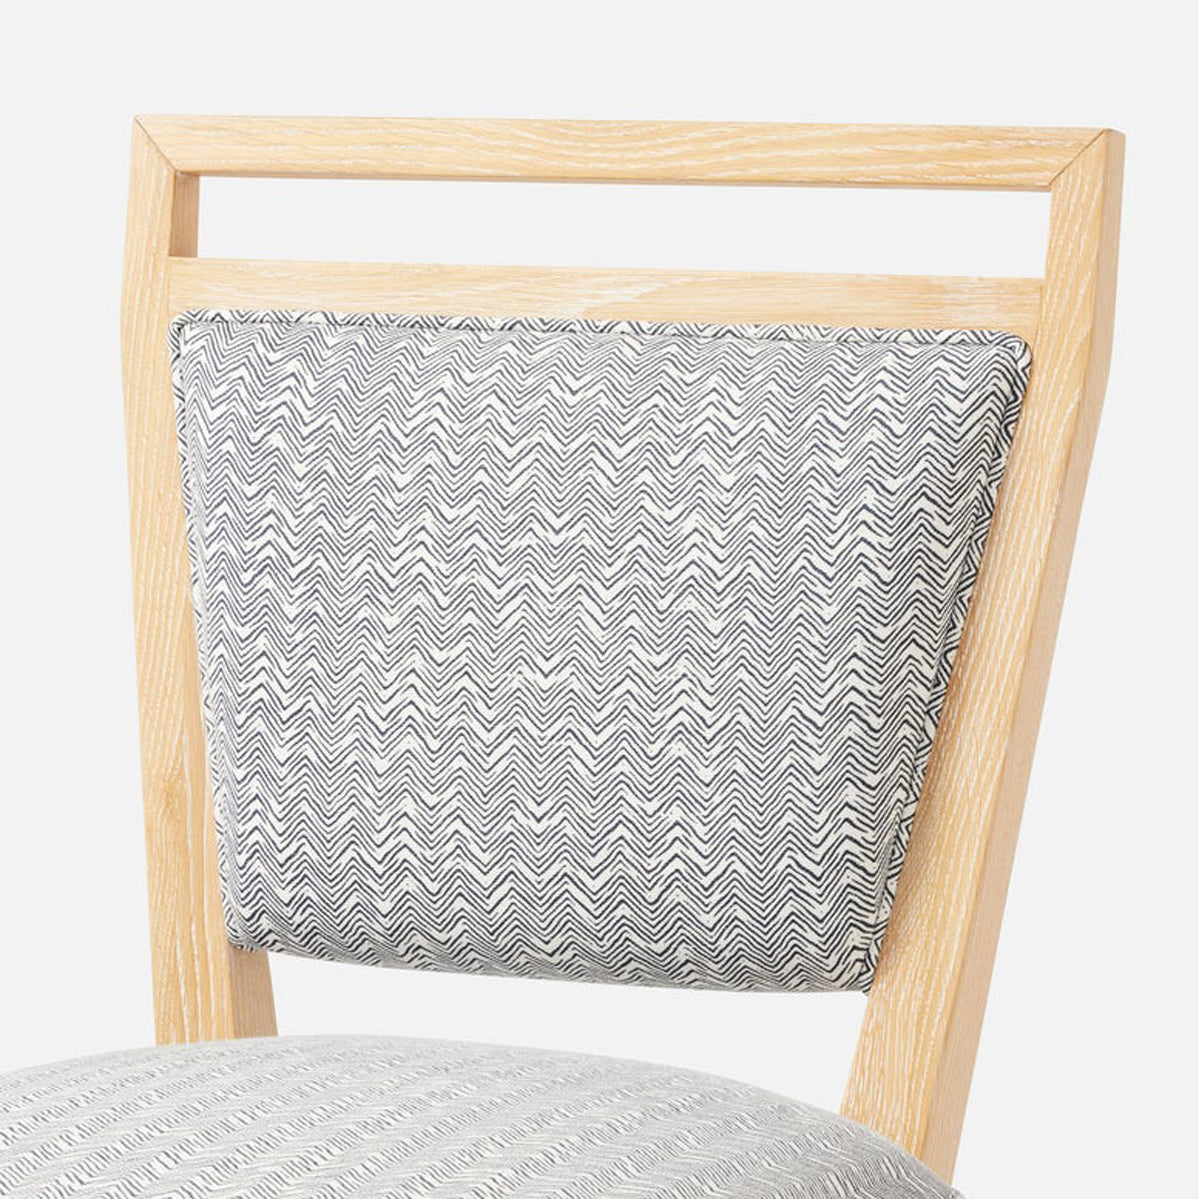 Made Goods Patrick Dining Chair in Humboldt Cotton Jute